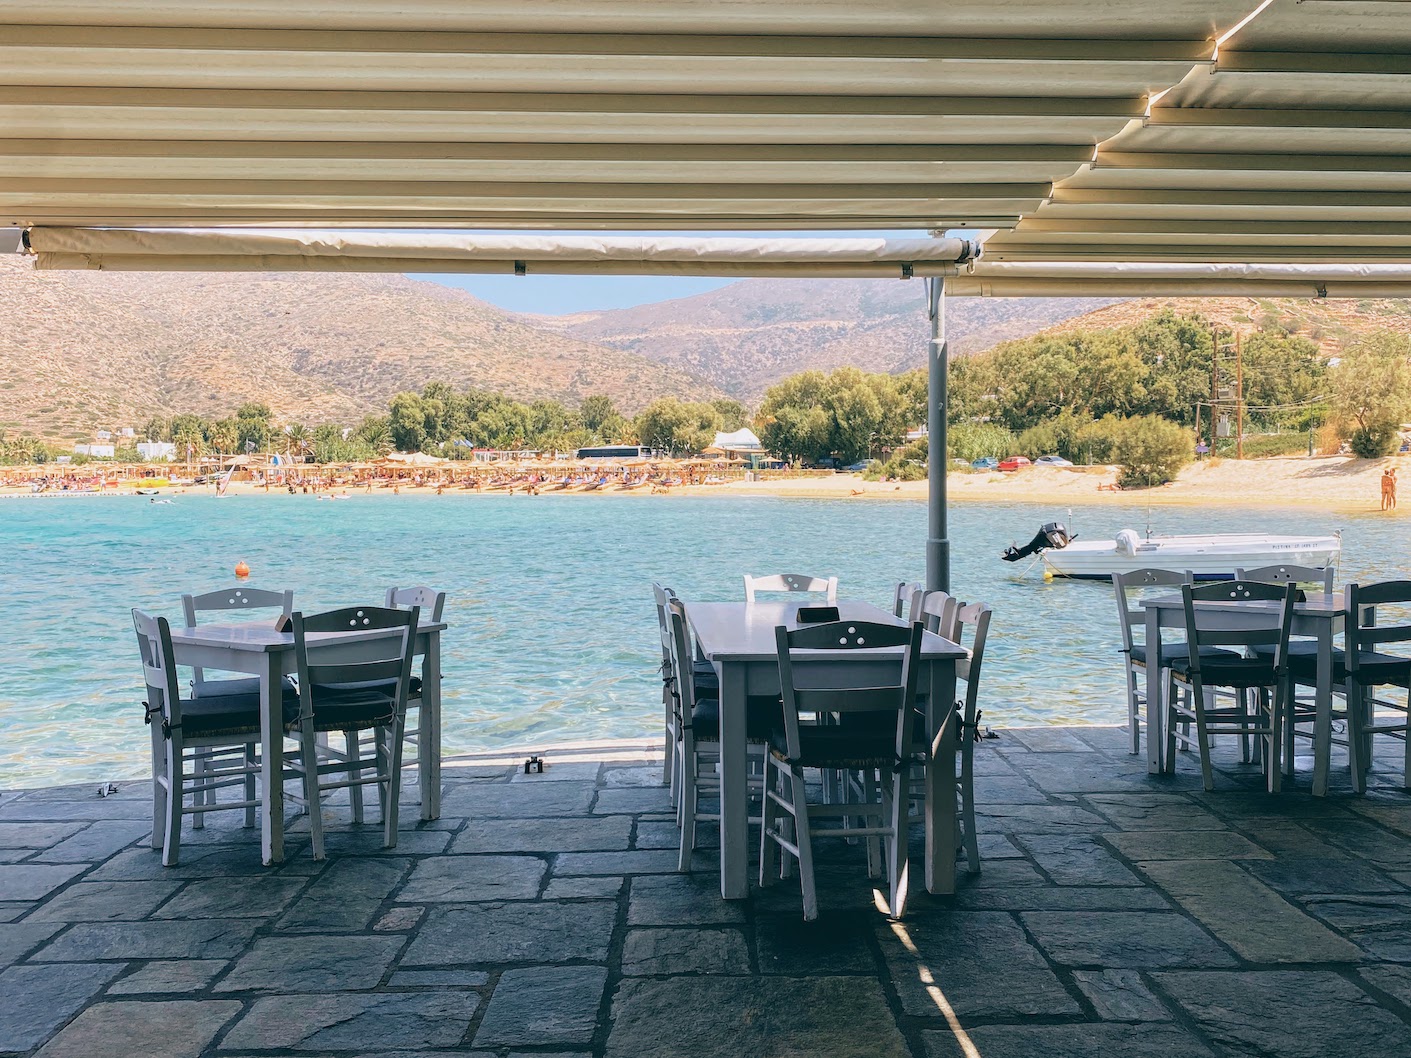 Ios: traditional seafood and meze right by the sea at Drakos